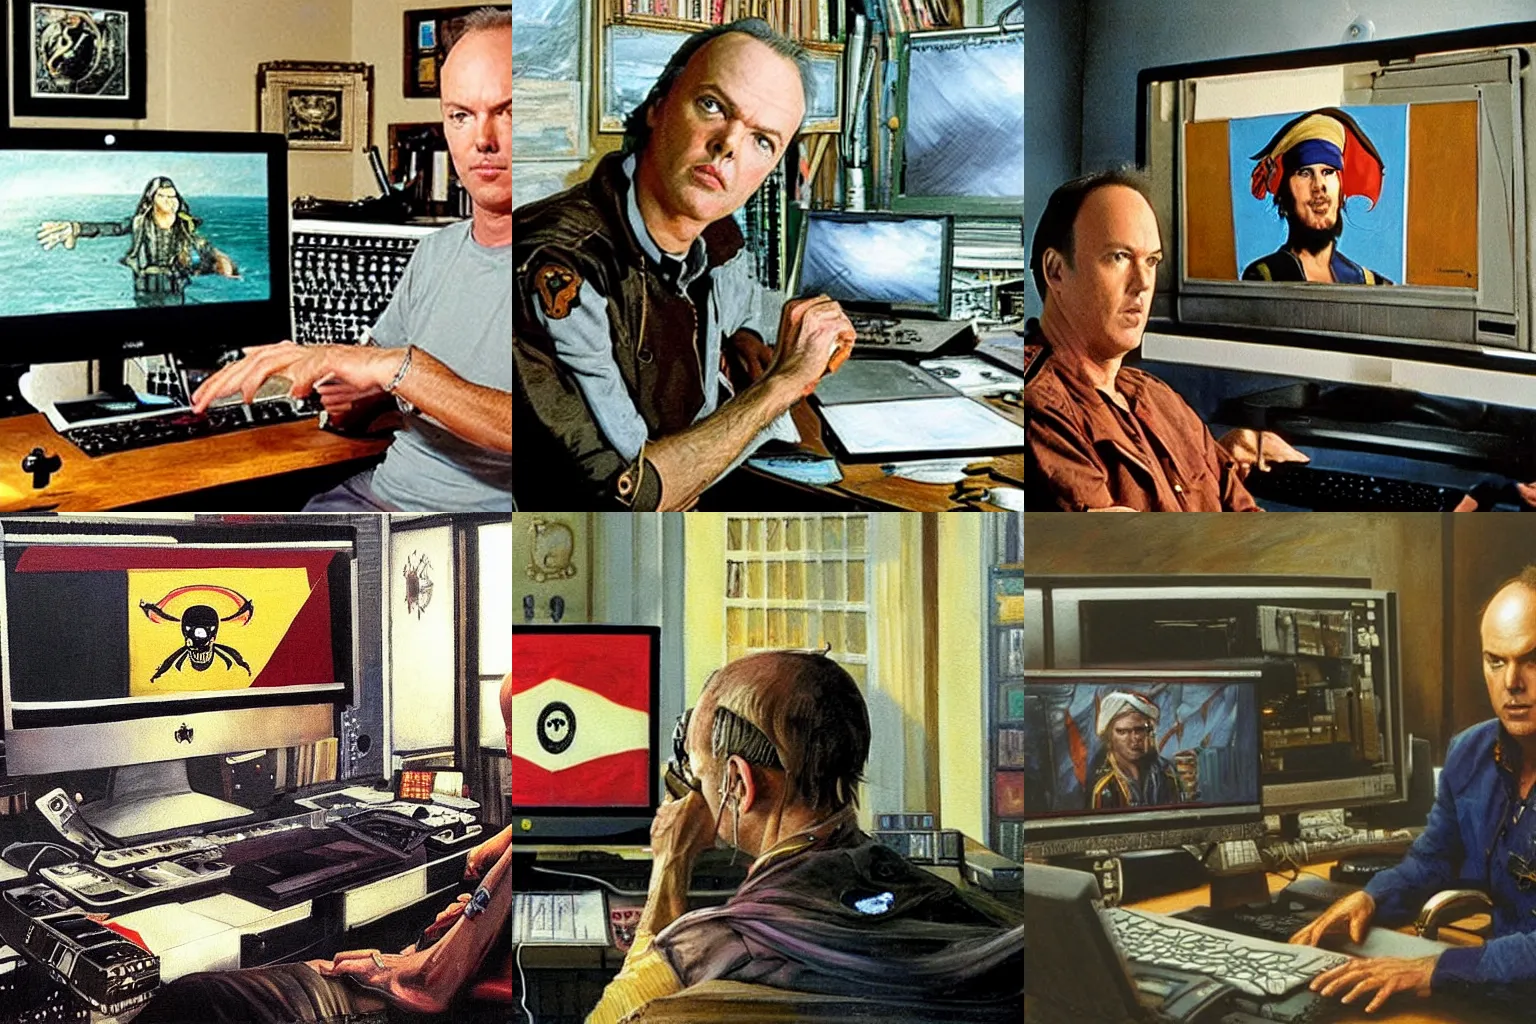 Prompt: michael keaton in his computer with a brown pirate flag on the screen, painting by James gurney